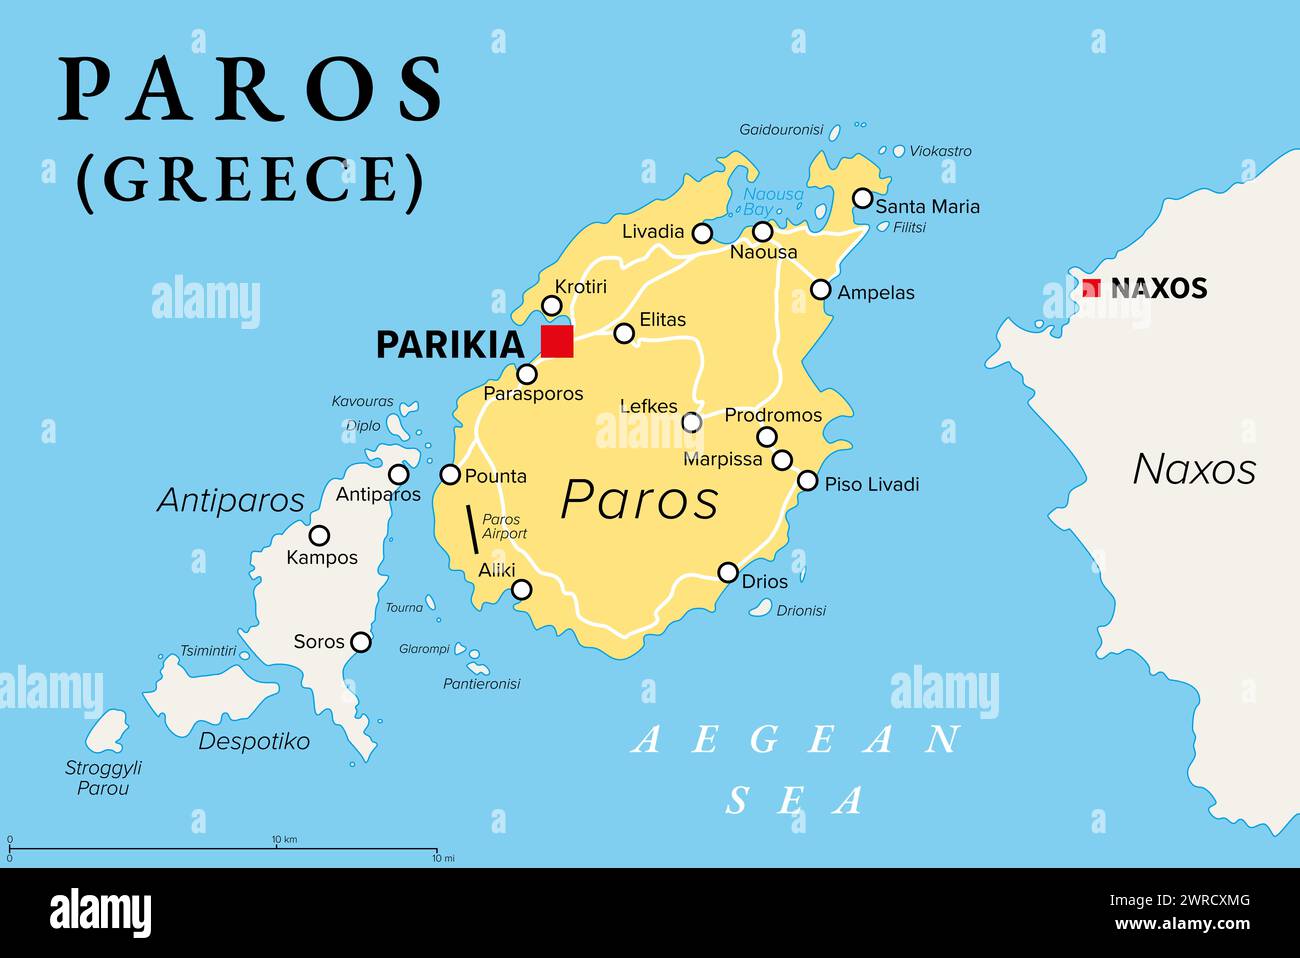 Paros, Greek island, political map. Island of Greece in the Aegean Sea, west of Naxos, and part of the Cyclades. With the island Antiparos. Stock Photo